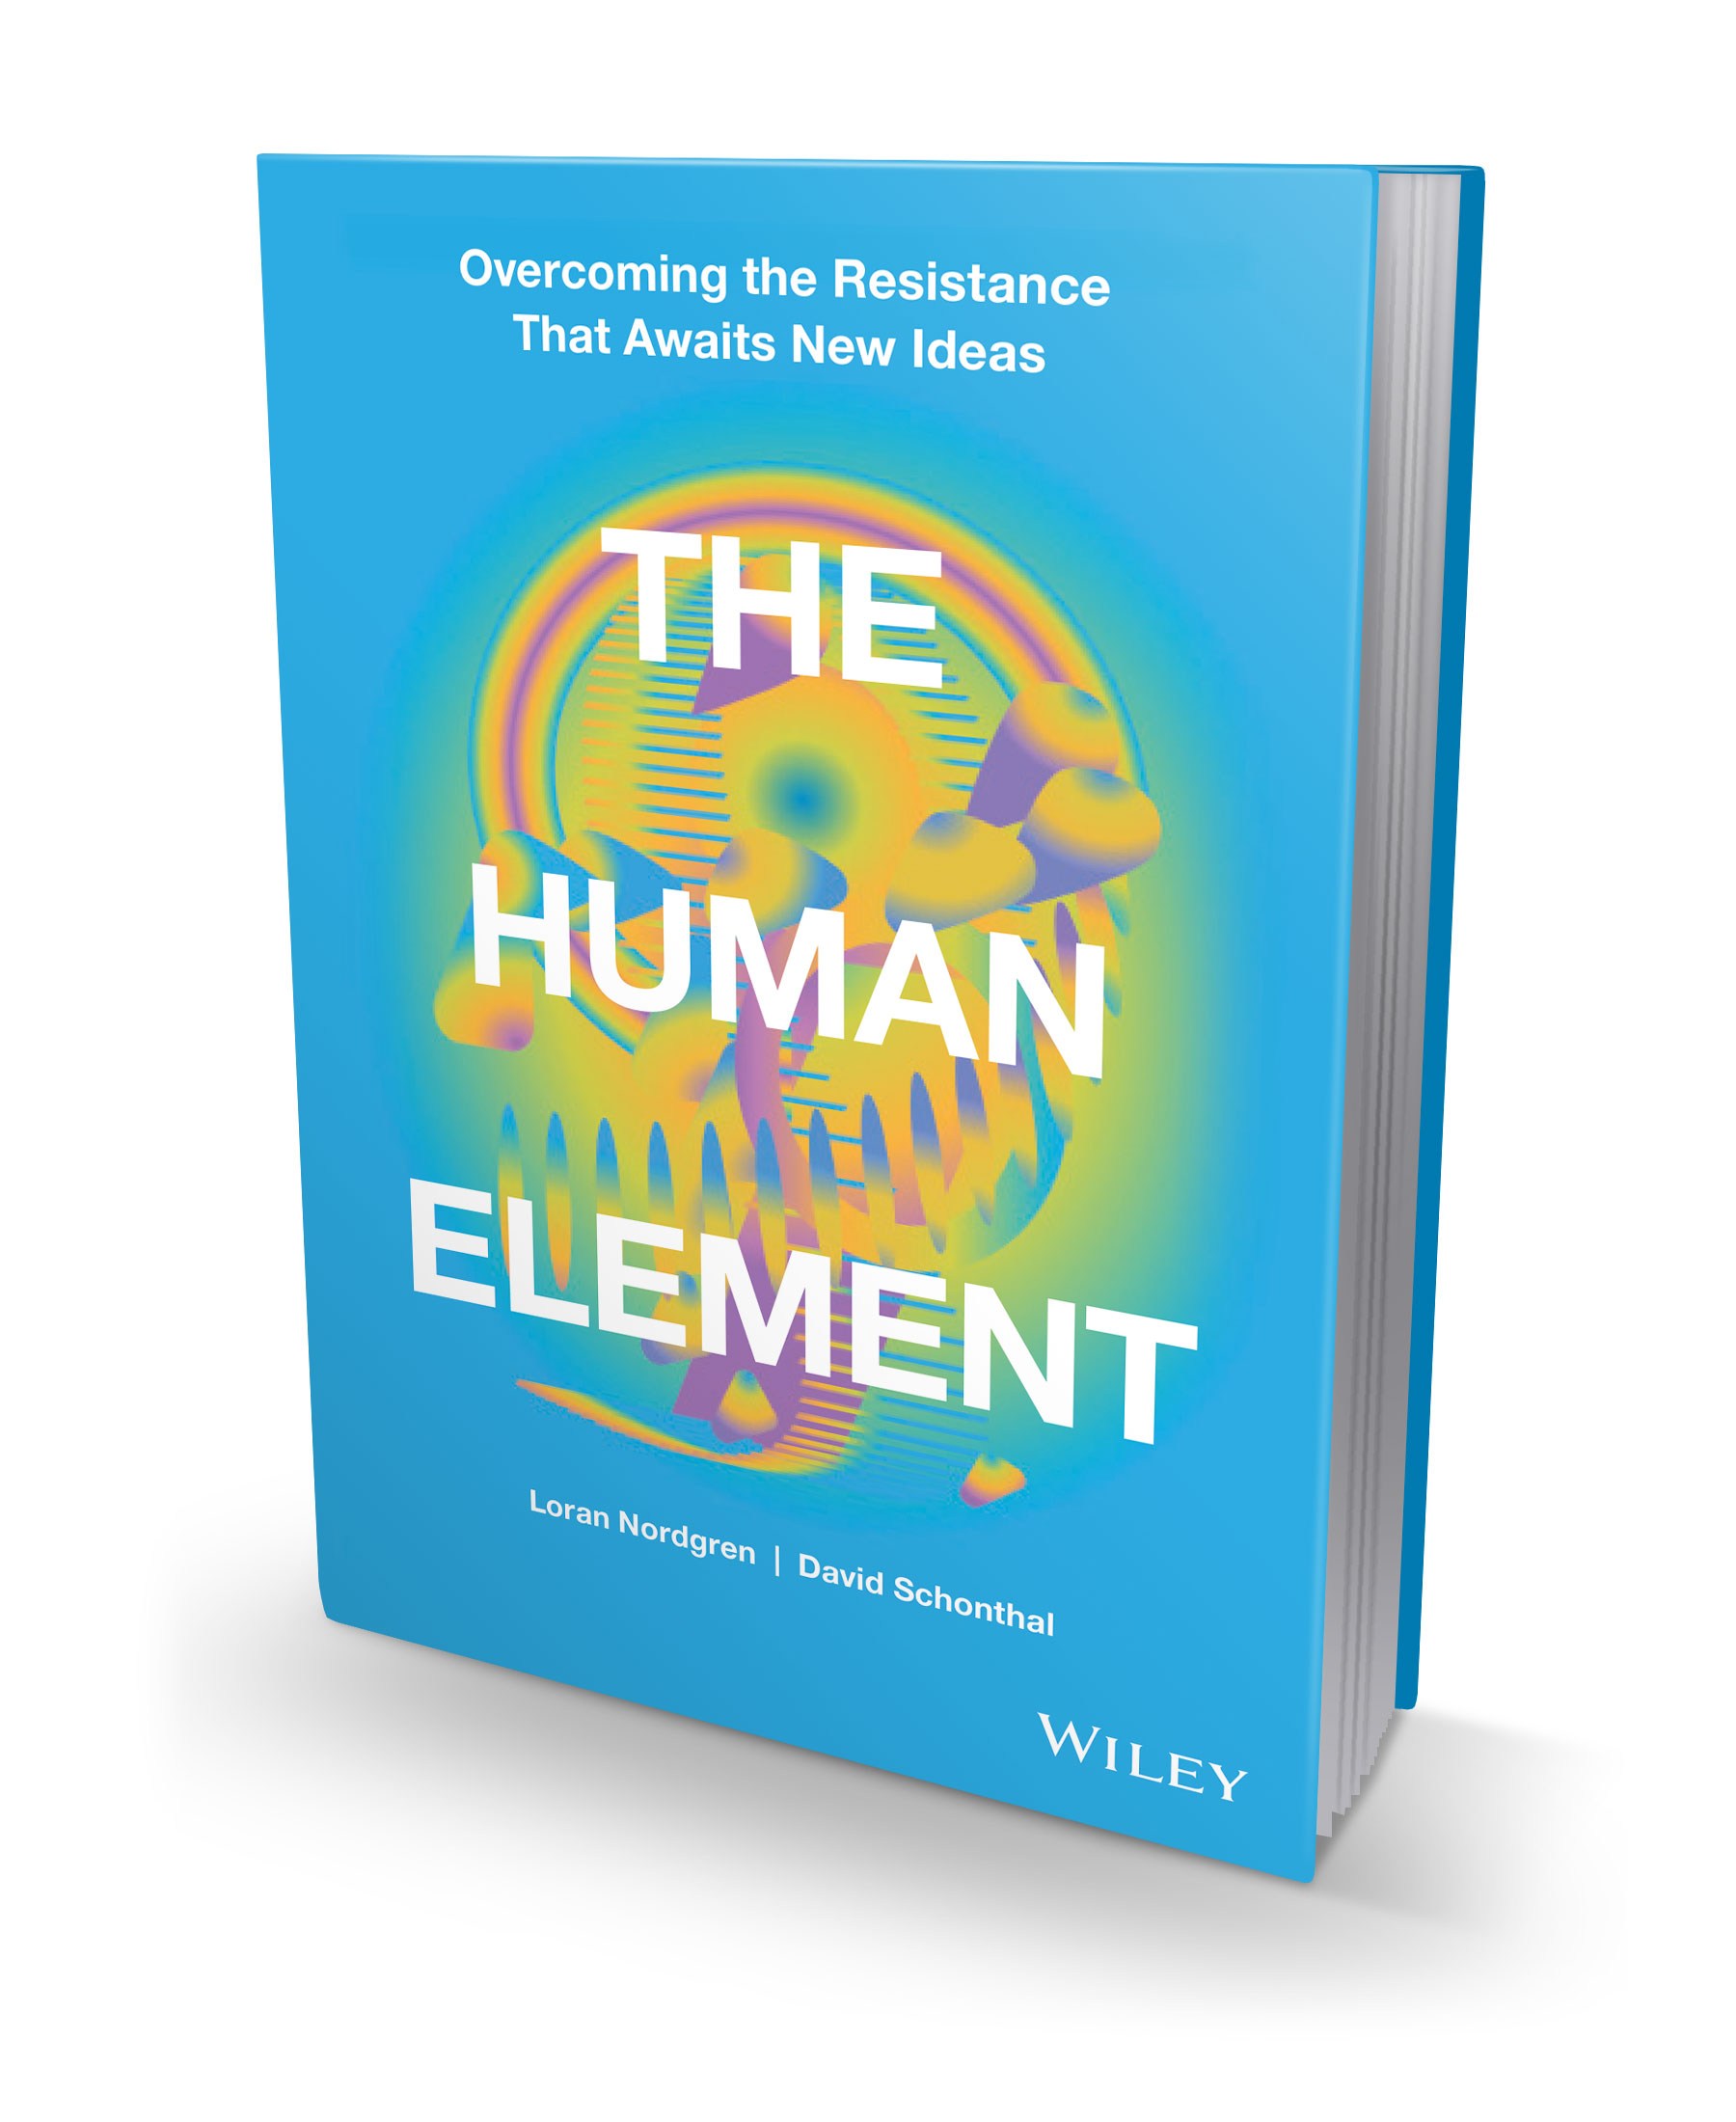 the human element book review